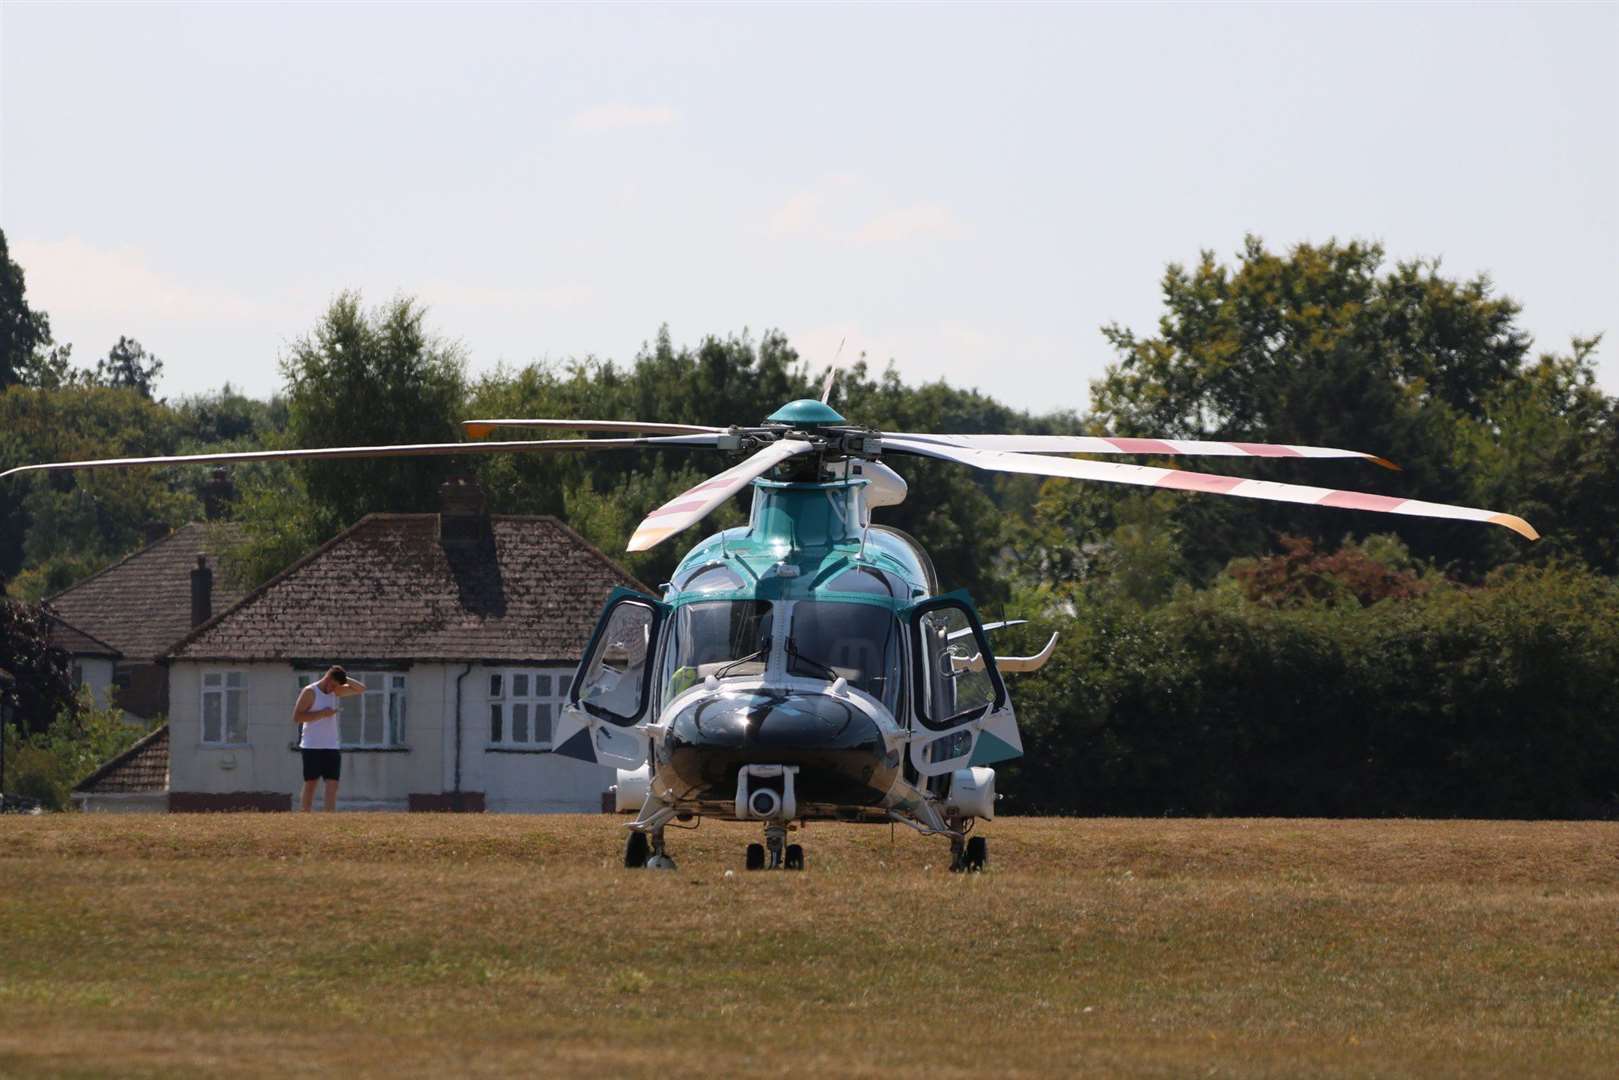 The air ambulance landed at Swanley Park after a child was hit by a car on Sunday. Picture: Stock/Ethan Harris